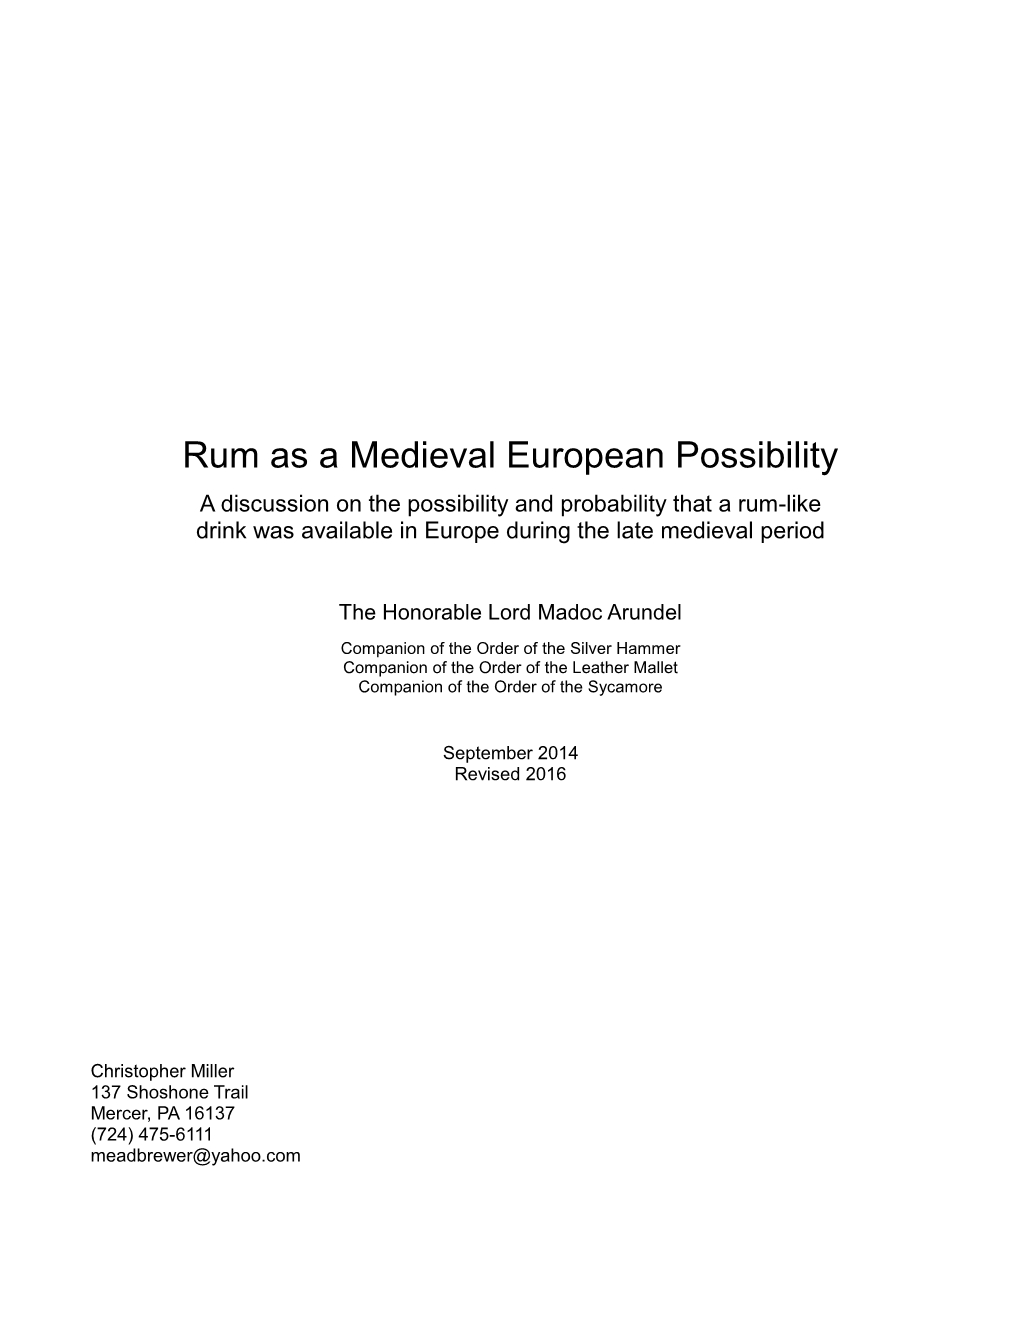 Rum As a Medieval European Possibility a Discussion on the Possibility and Probability That a Rum-Like Drink Was Available in Europe During the Late Medieval Period